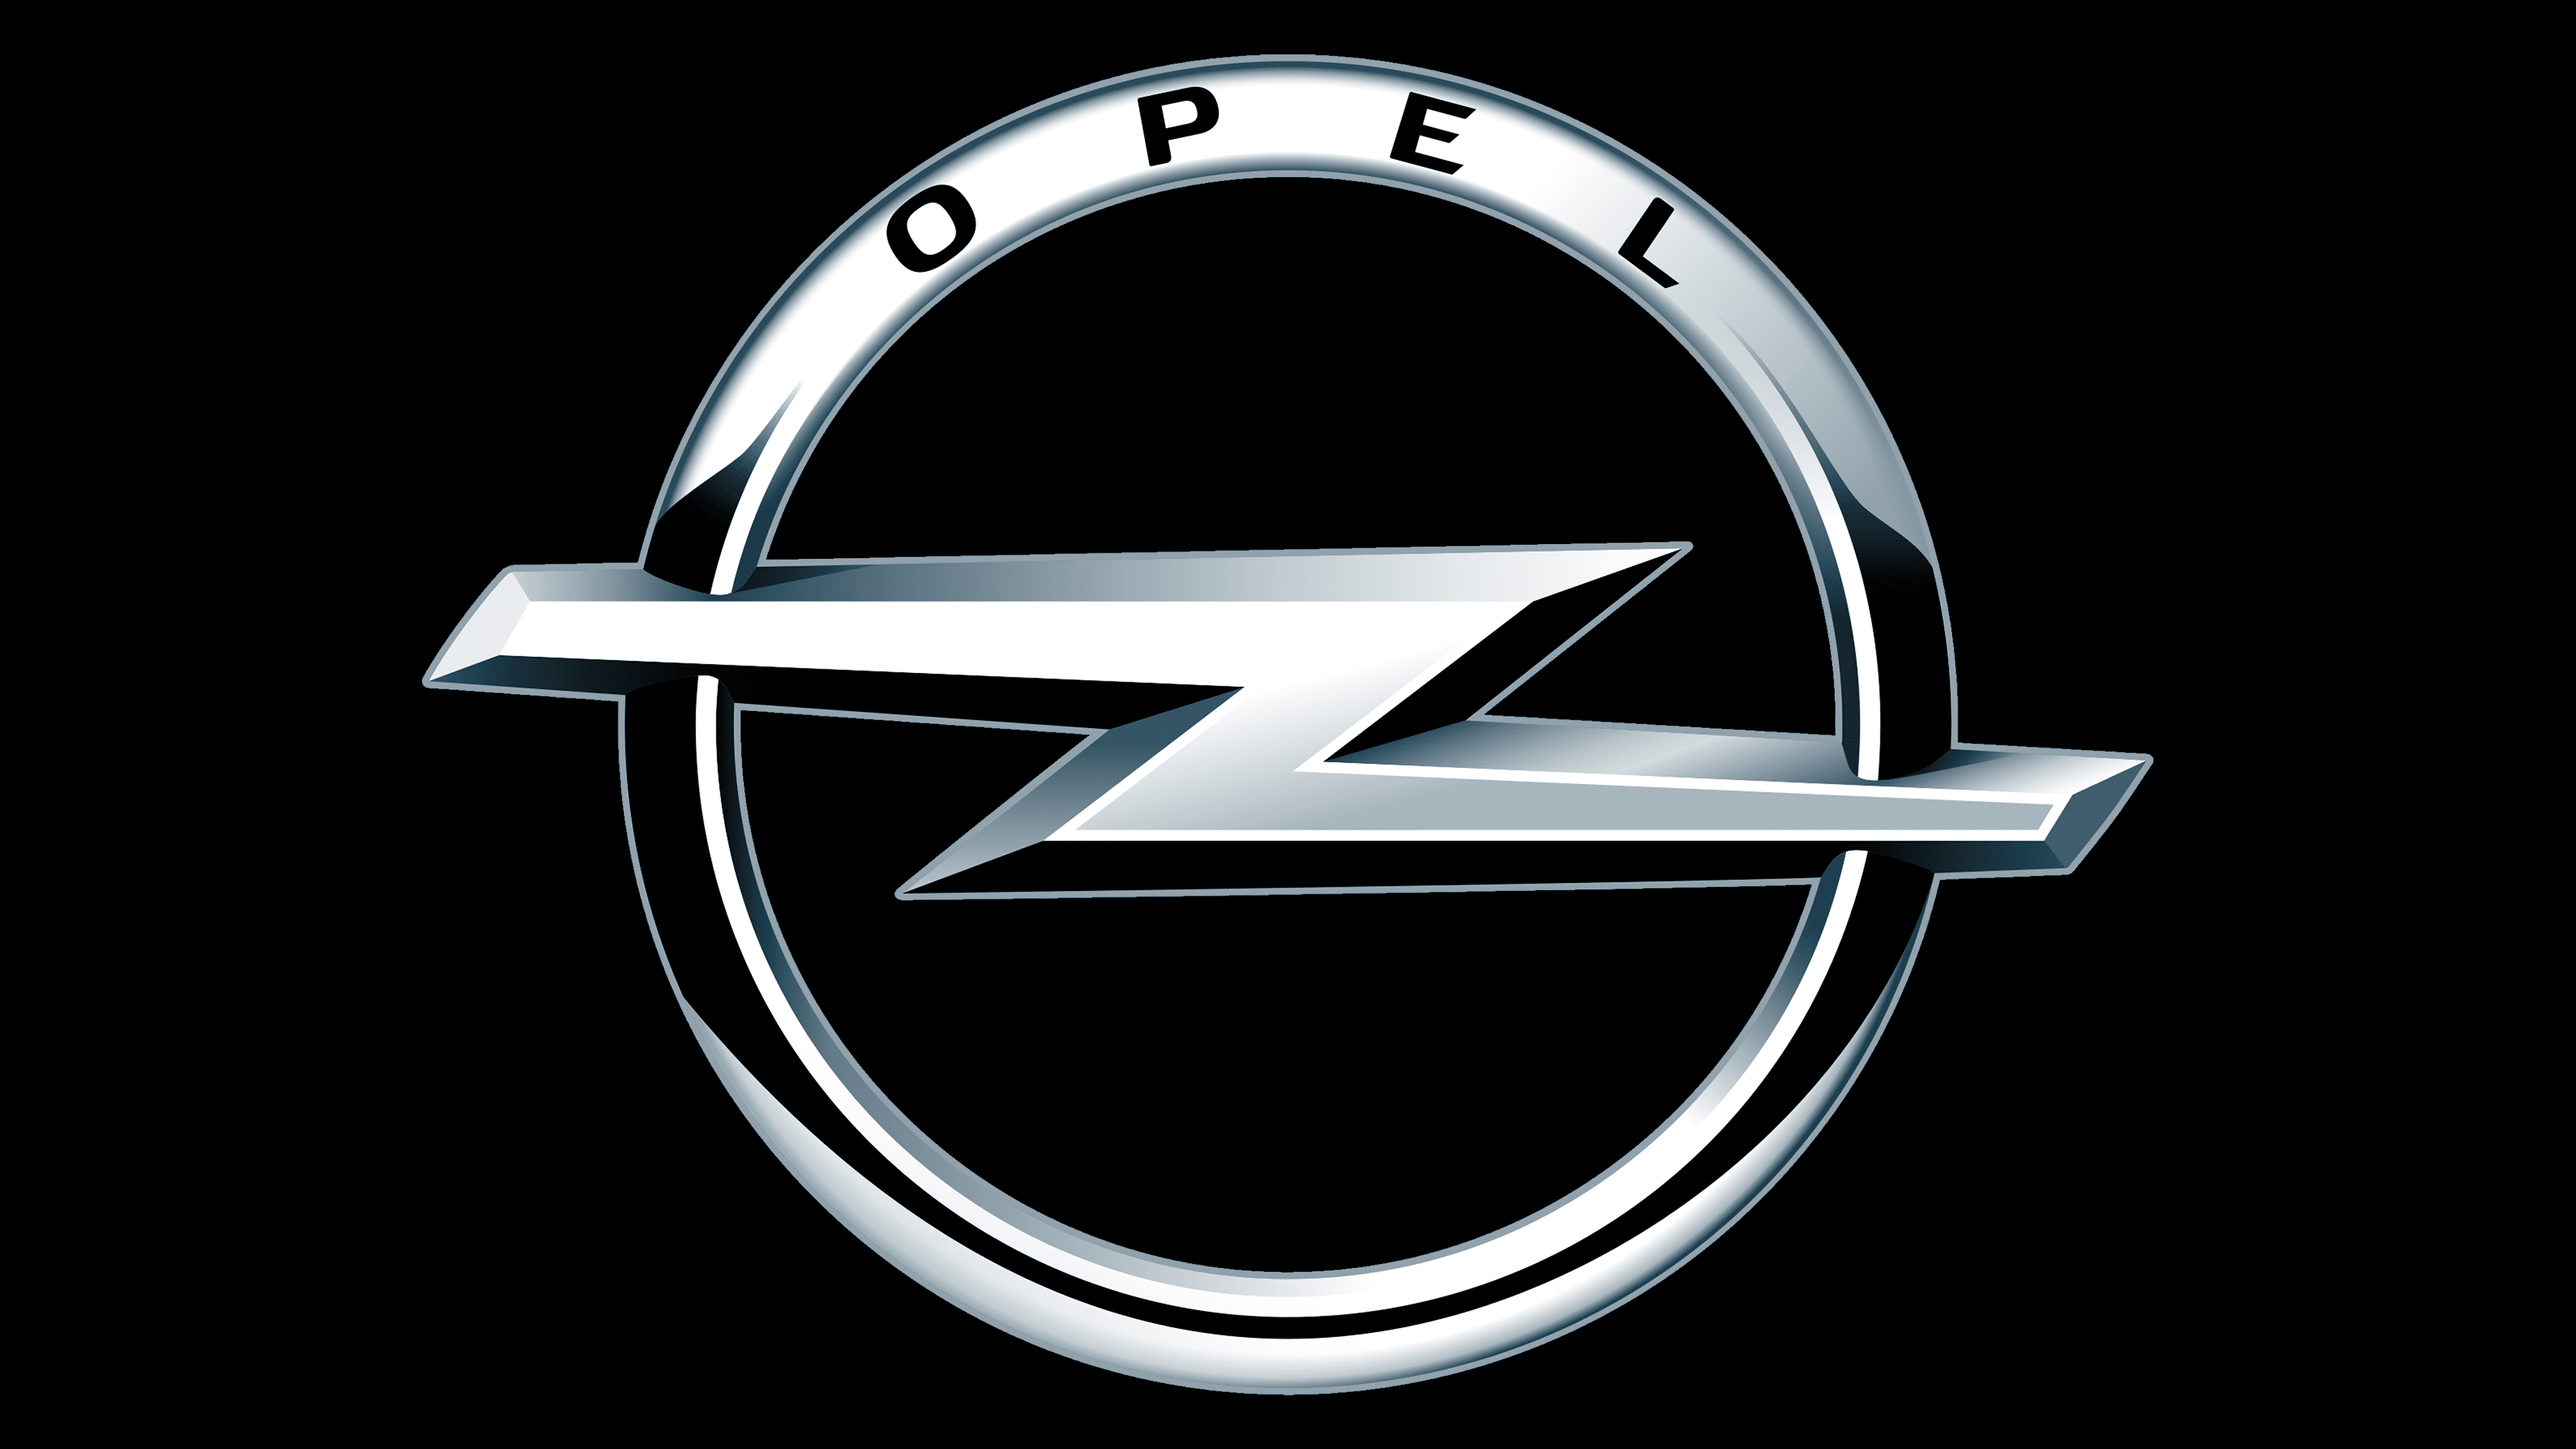 Opel Logo, symbol, meaning, history, PNG, brand